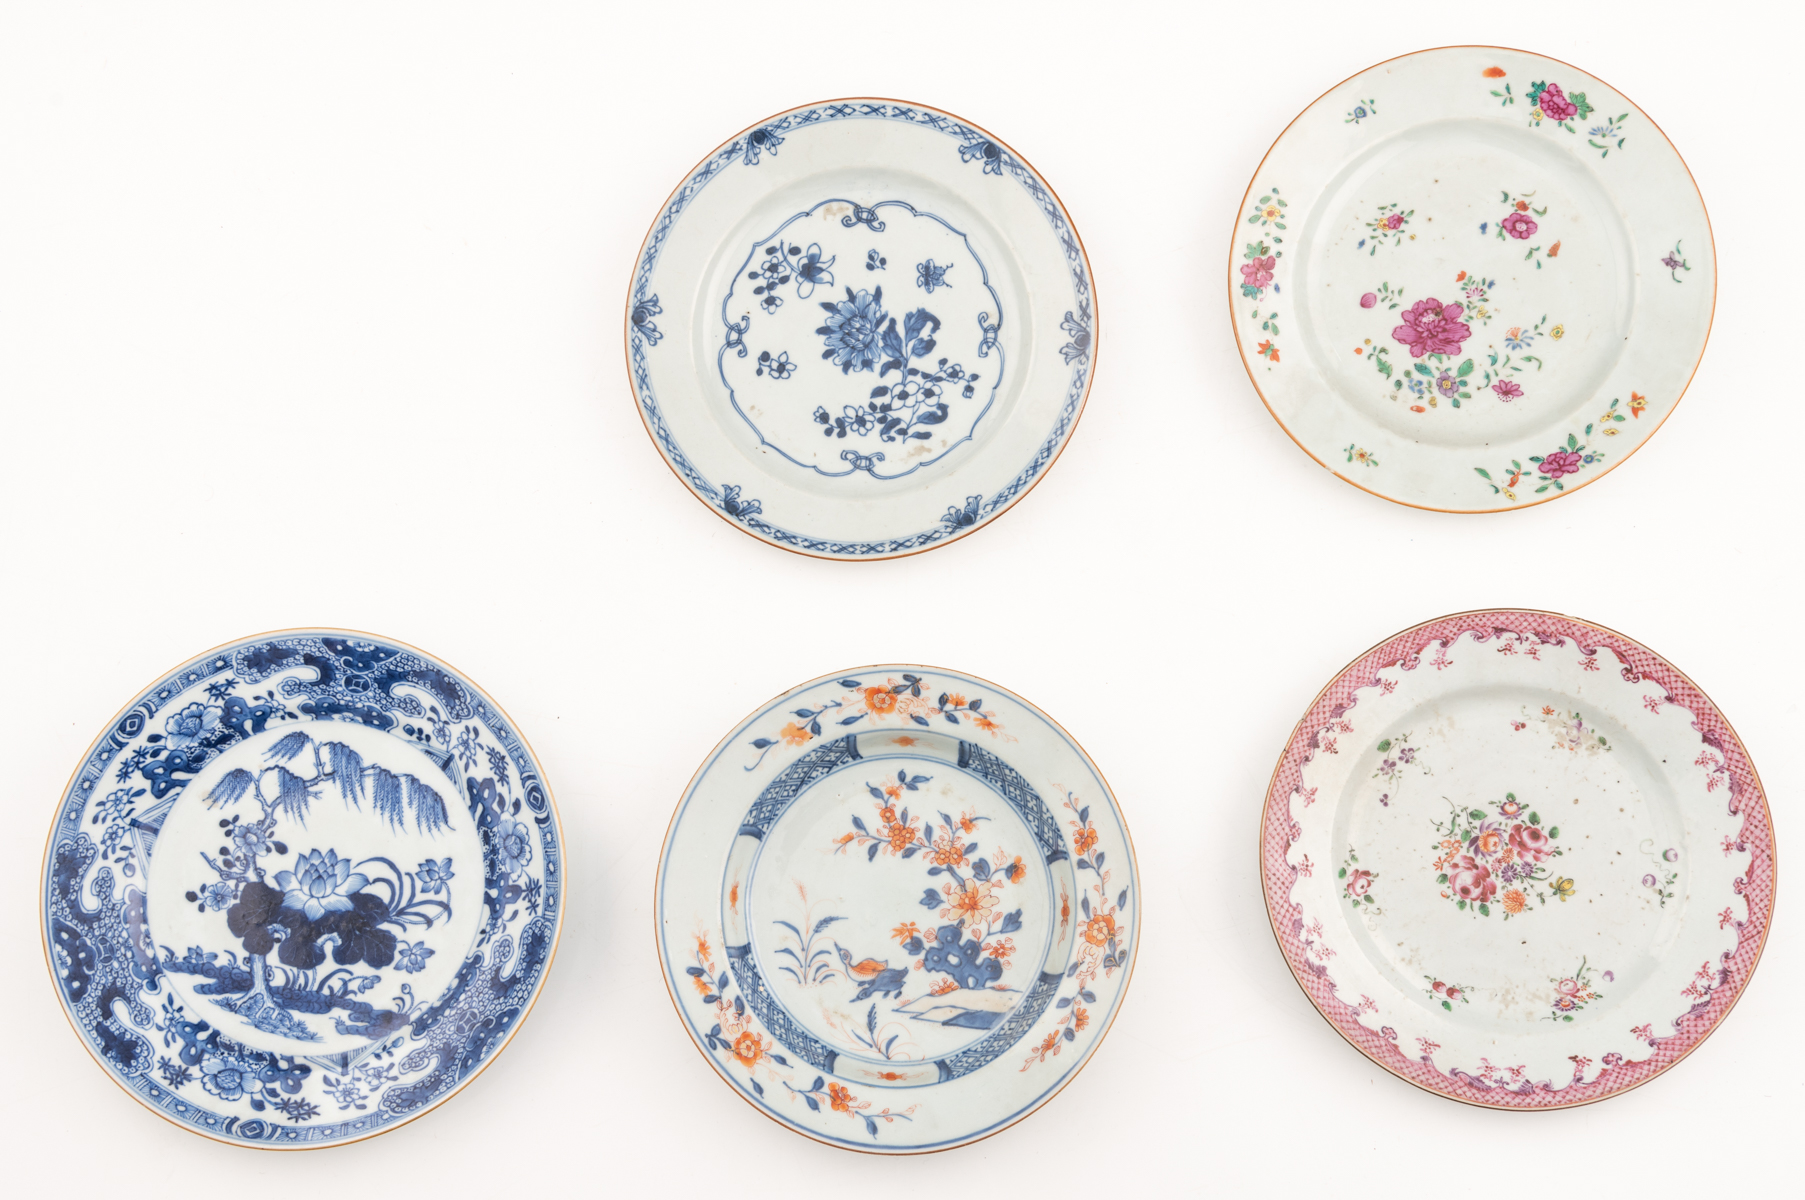 Eleven Chinese export porcelain dishes, floral decorated in Imari, famille rose, and underglaze blue - Image 4 of 11